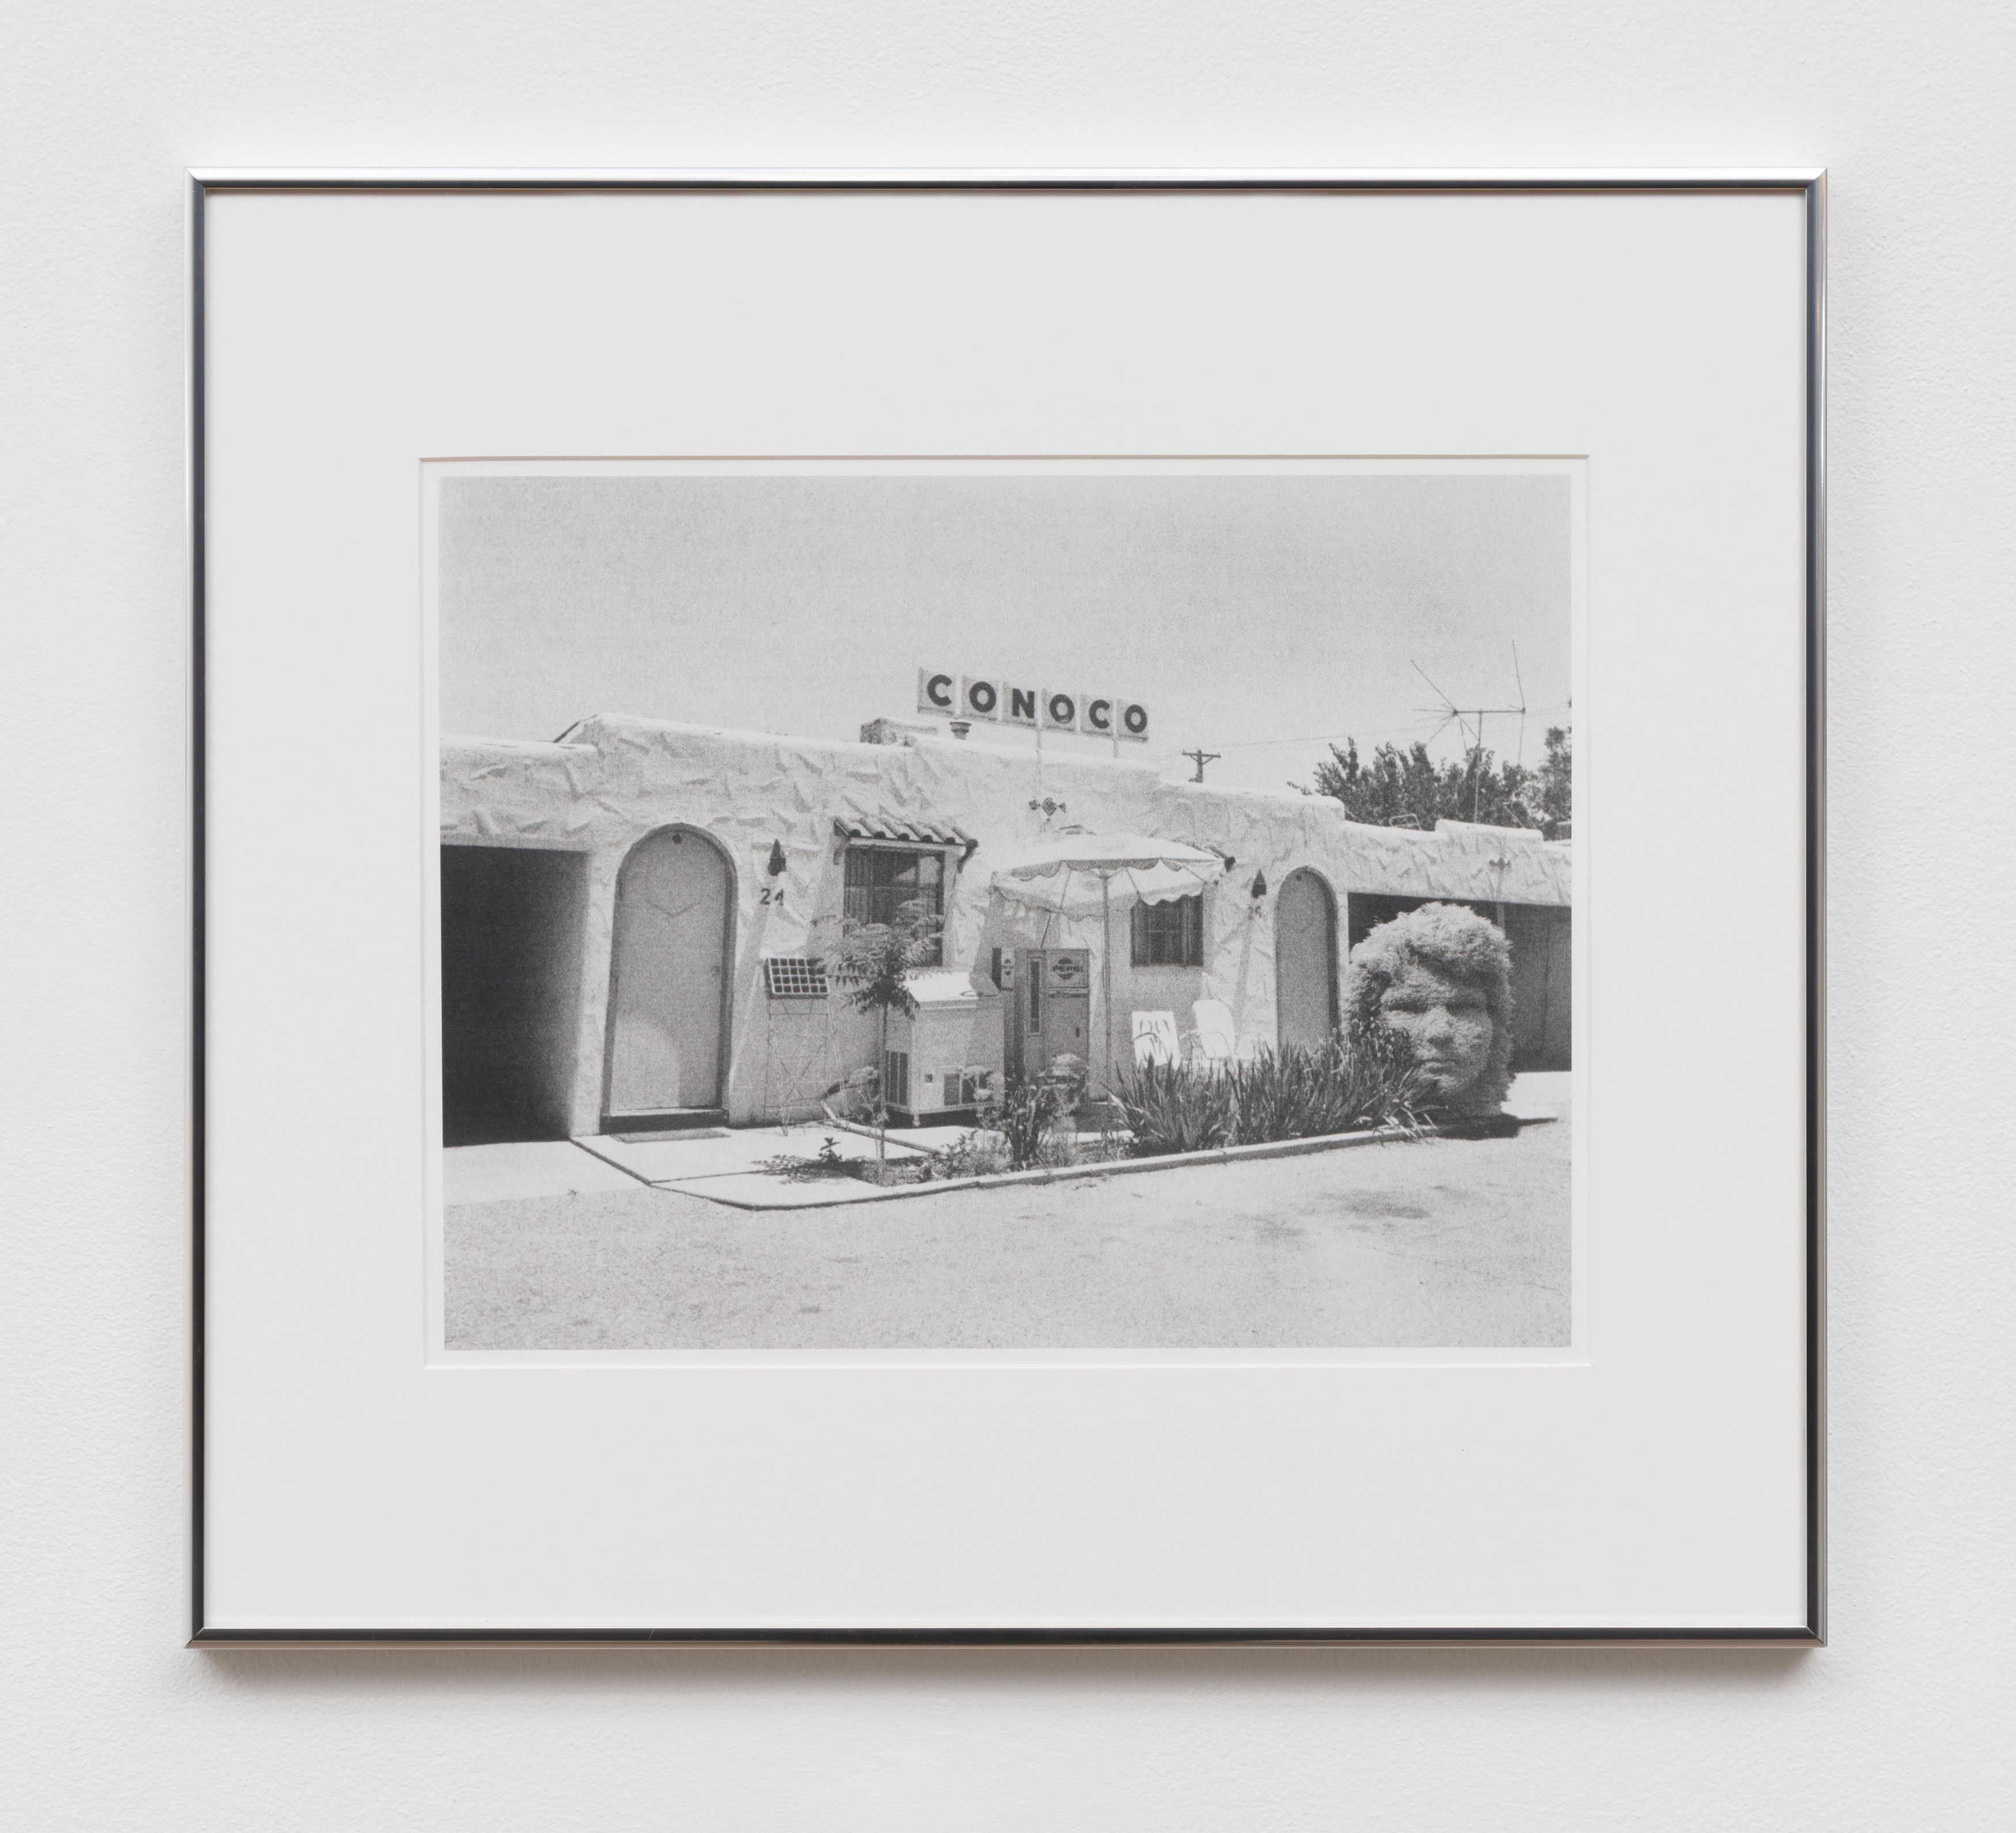 Erin Calla Watson, Route 66 Motels, 2023, gelatin silver print, 10 5/16 x 14 in. (27.71 x 35.56 cm) (image size), 18 x 20 in. (45.72 x 50.08 cm) (framed size), edition of 3 with 2 AP